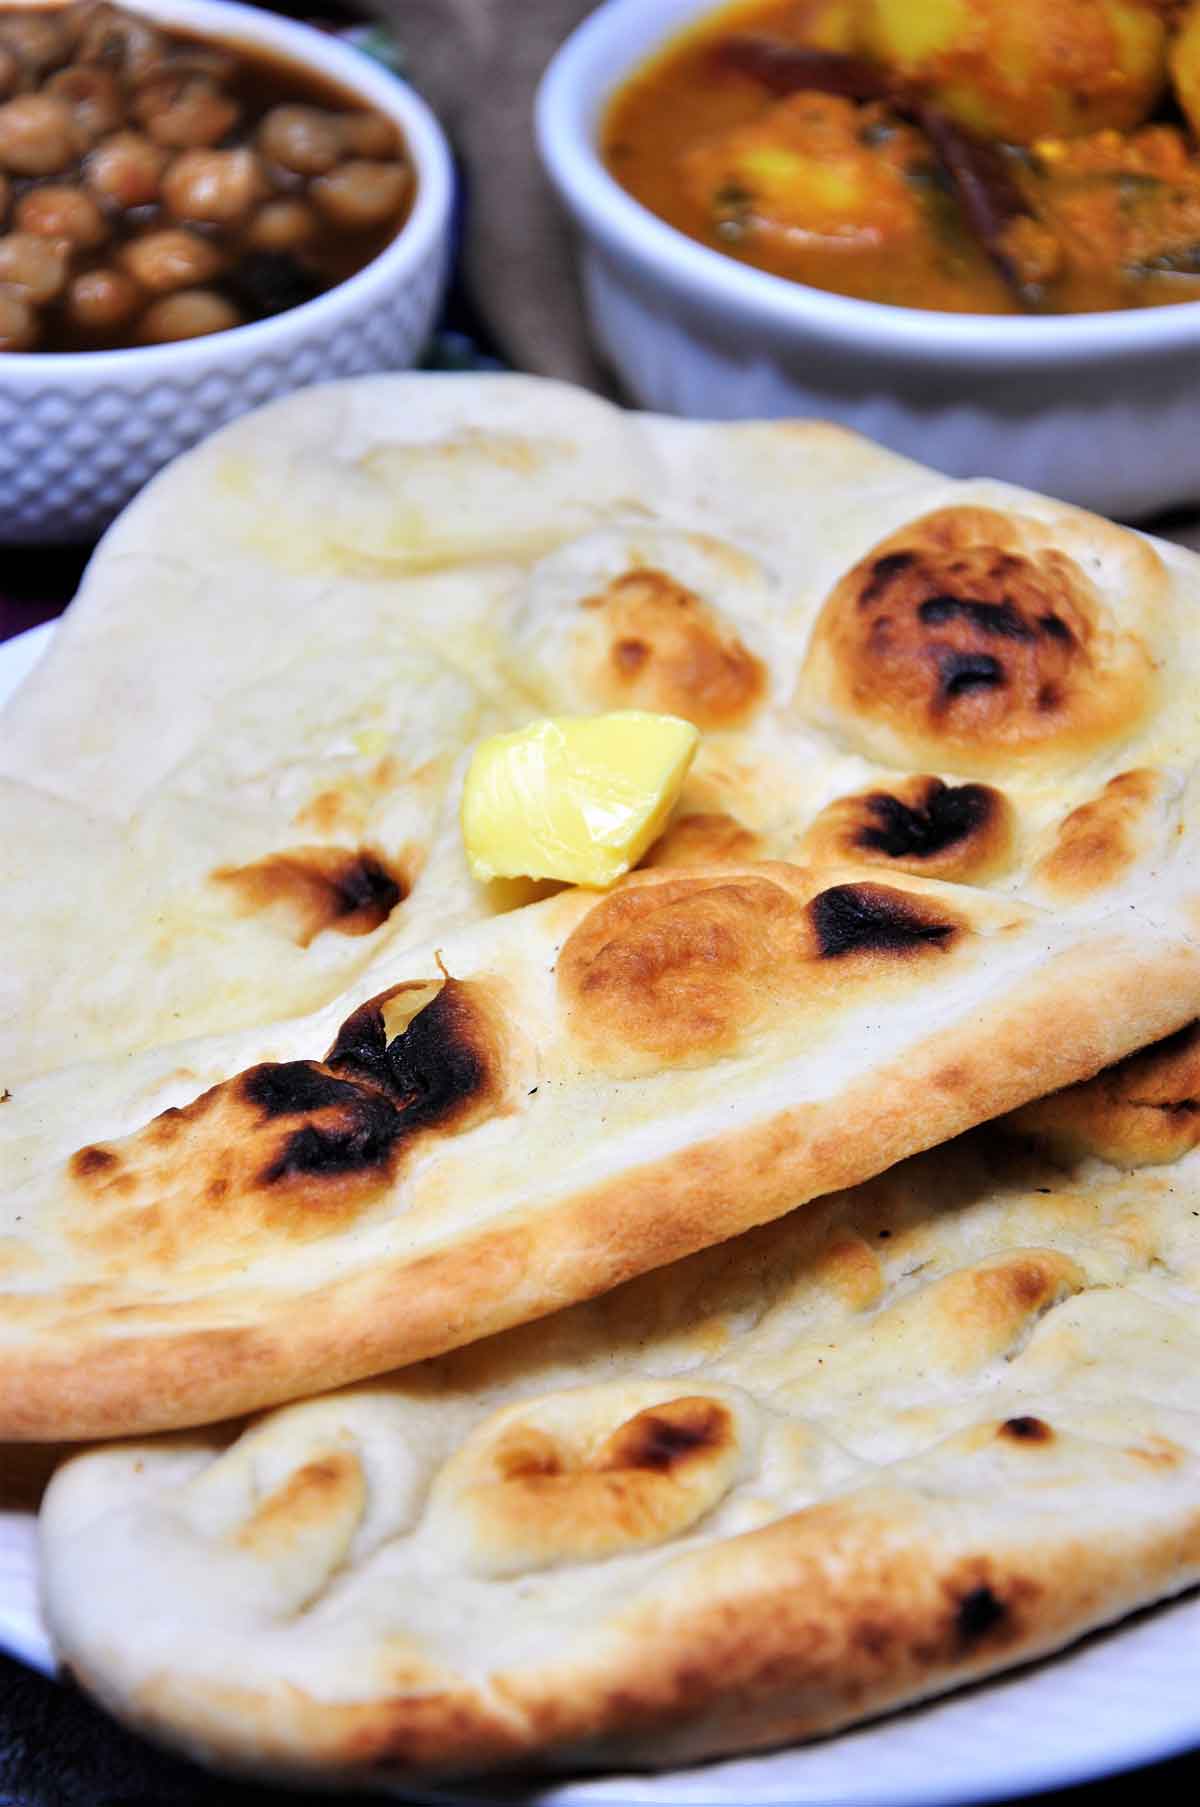 Two naans served in a plate with a dollop of butter.